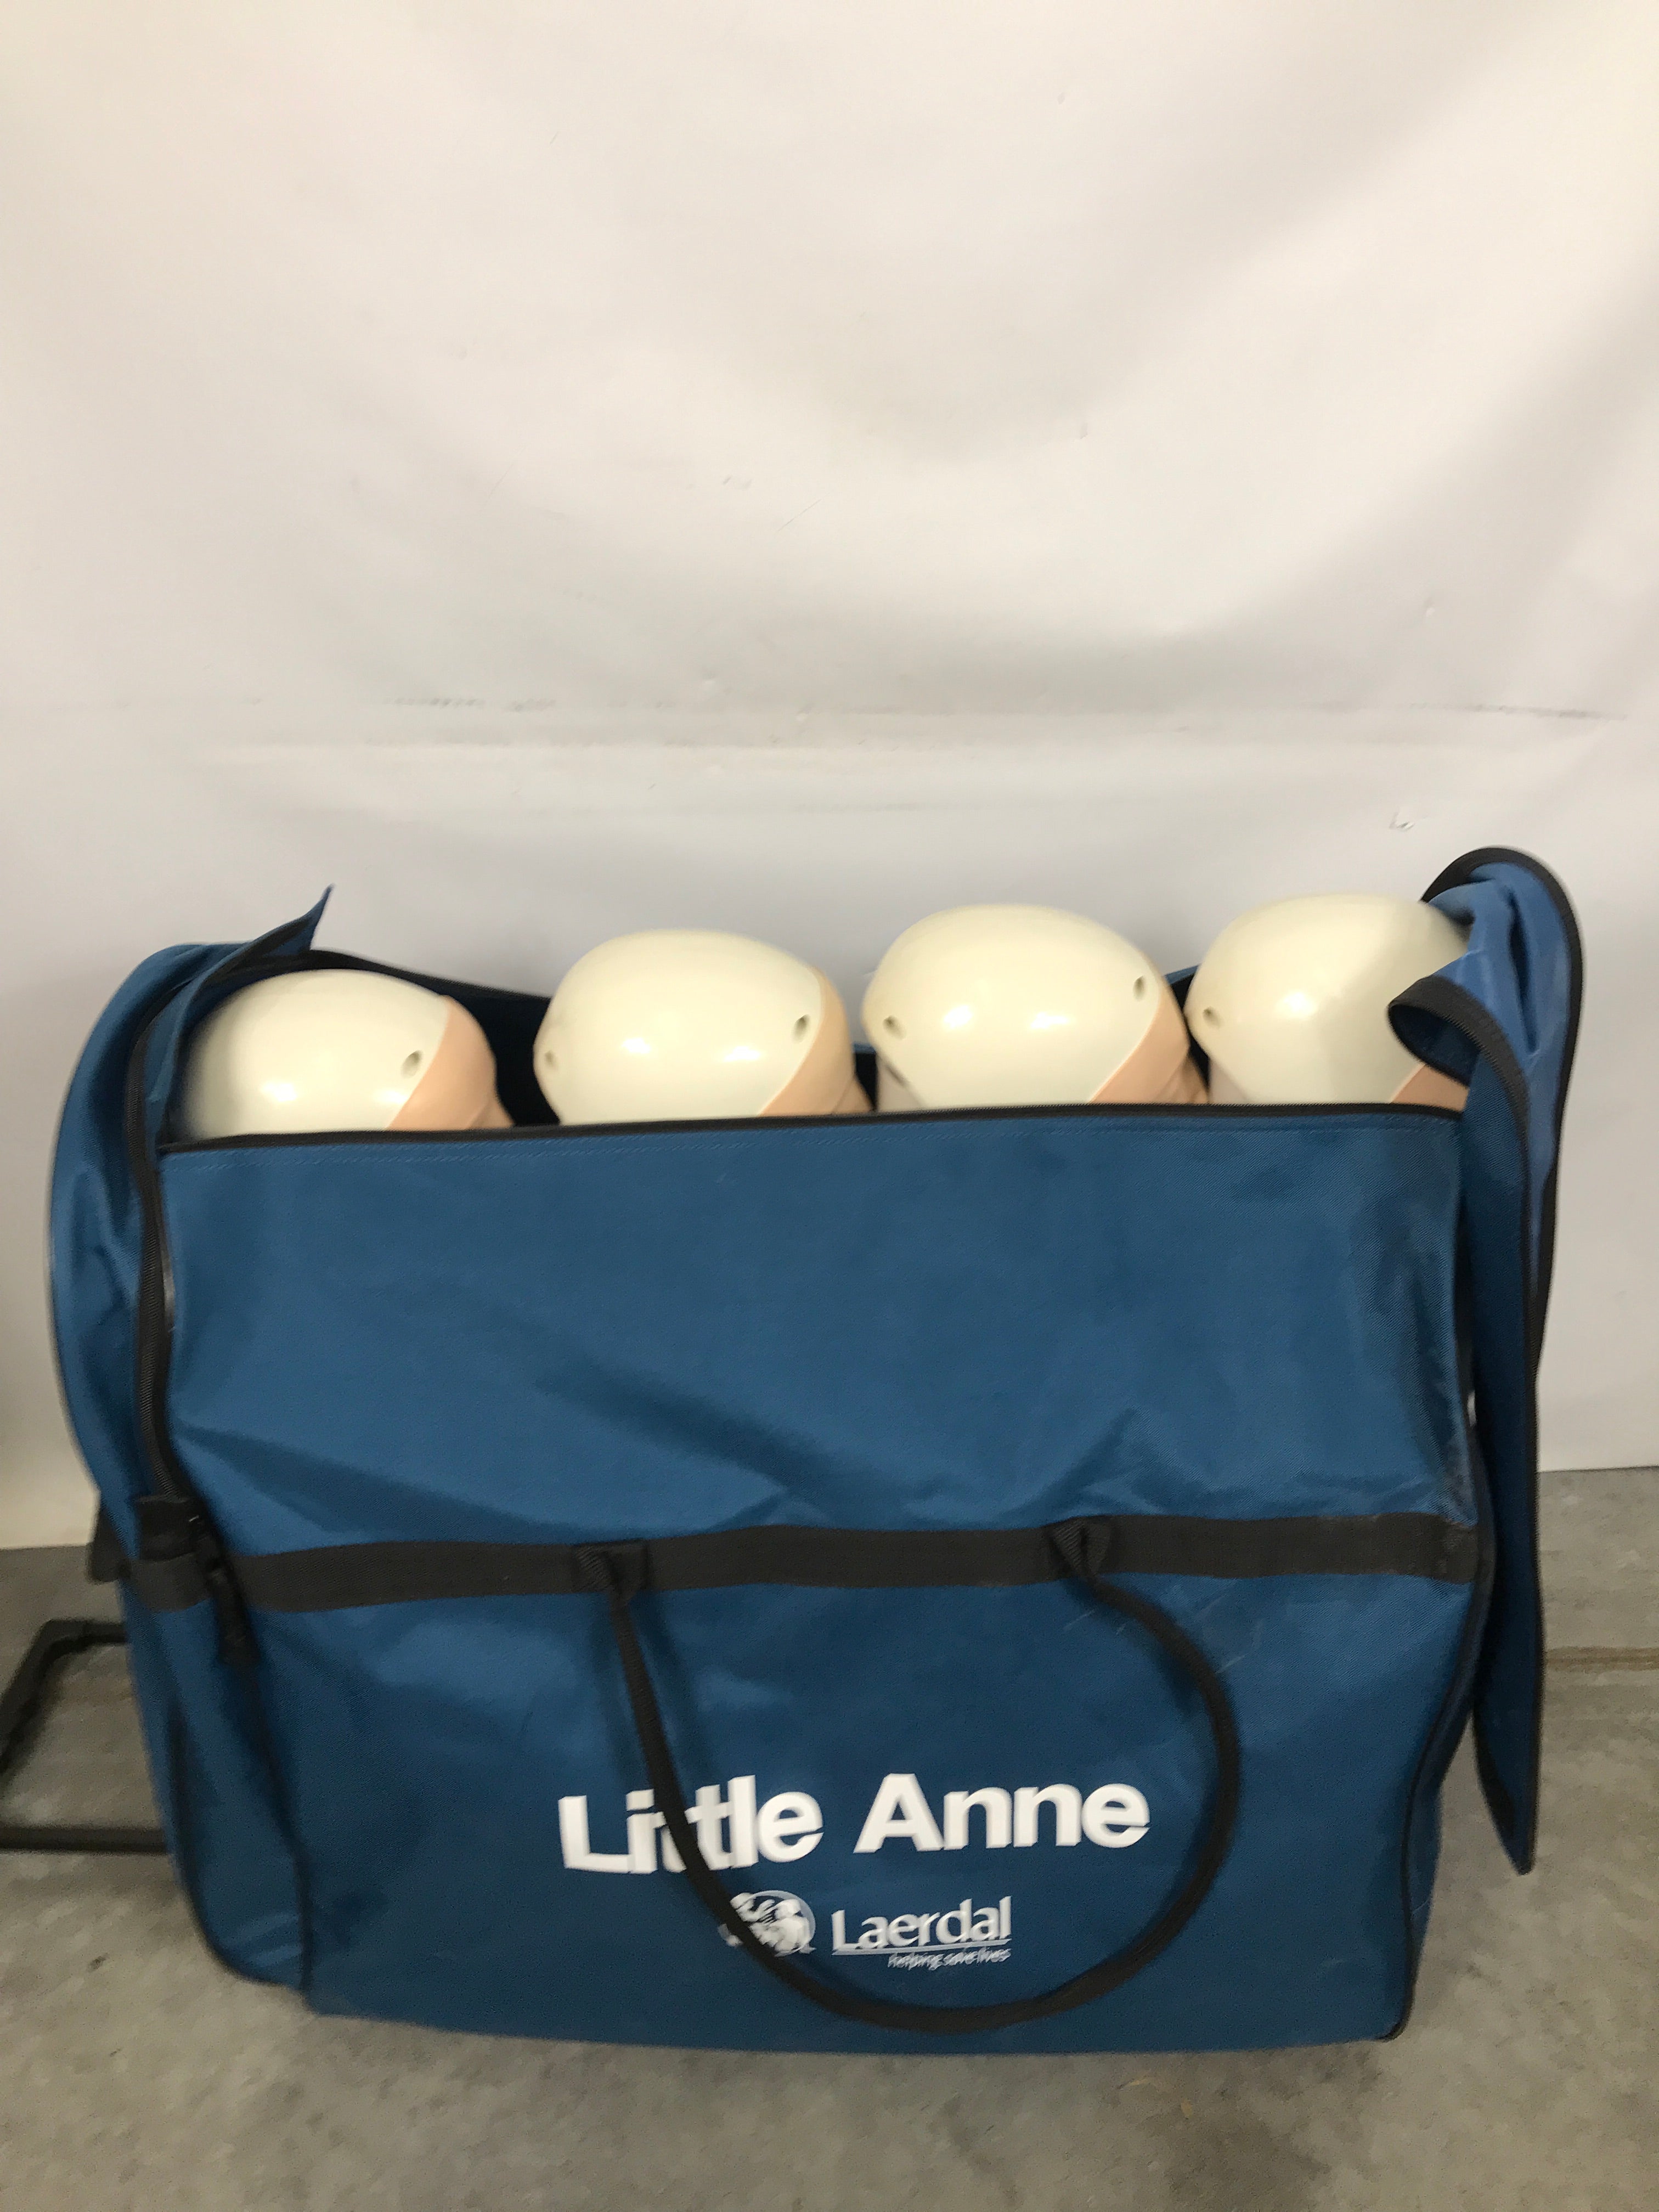 4 Laerdal Little Anne CPR Training Adult Torso Manikins with Bag and Extras #2